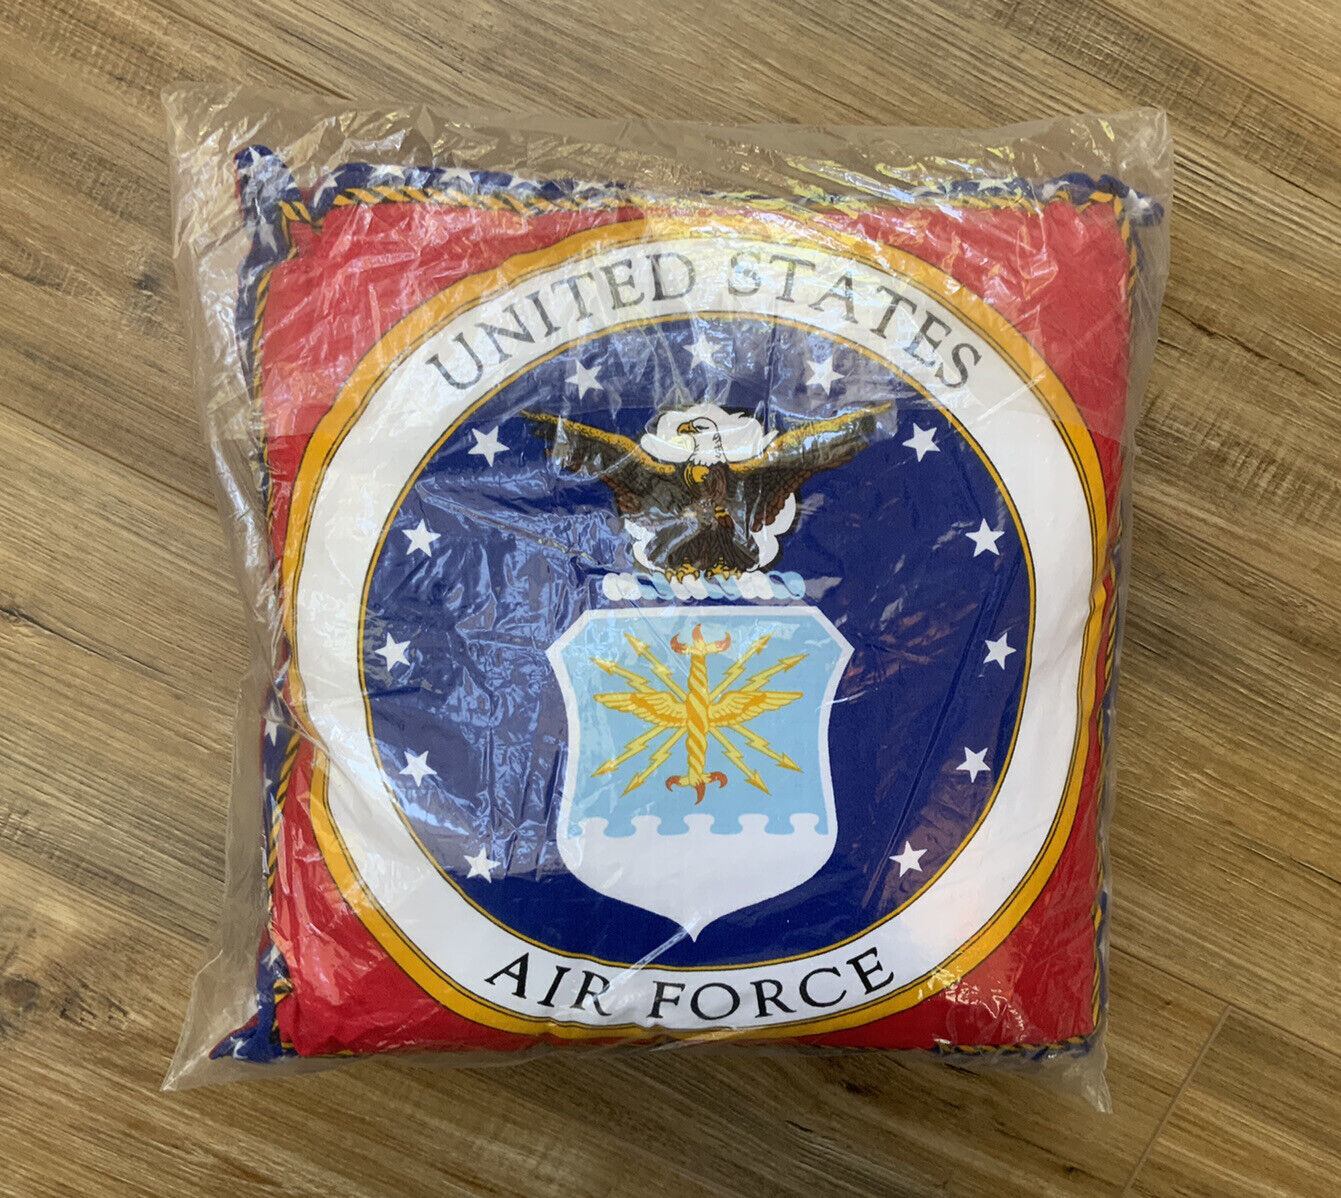 NEW VINTAGE SOFT N CRAFTY UNITED STATES AIR FORCE EAGLE USA THROW JOANN PILLOW